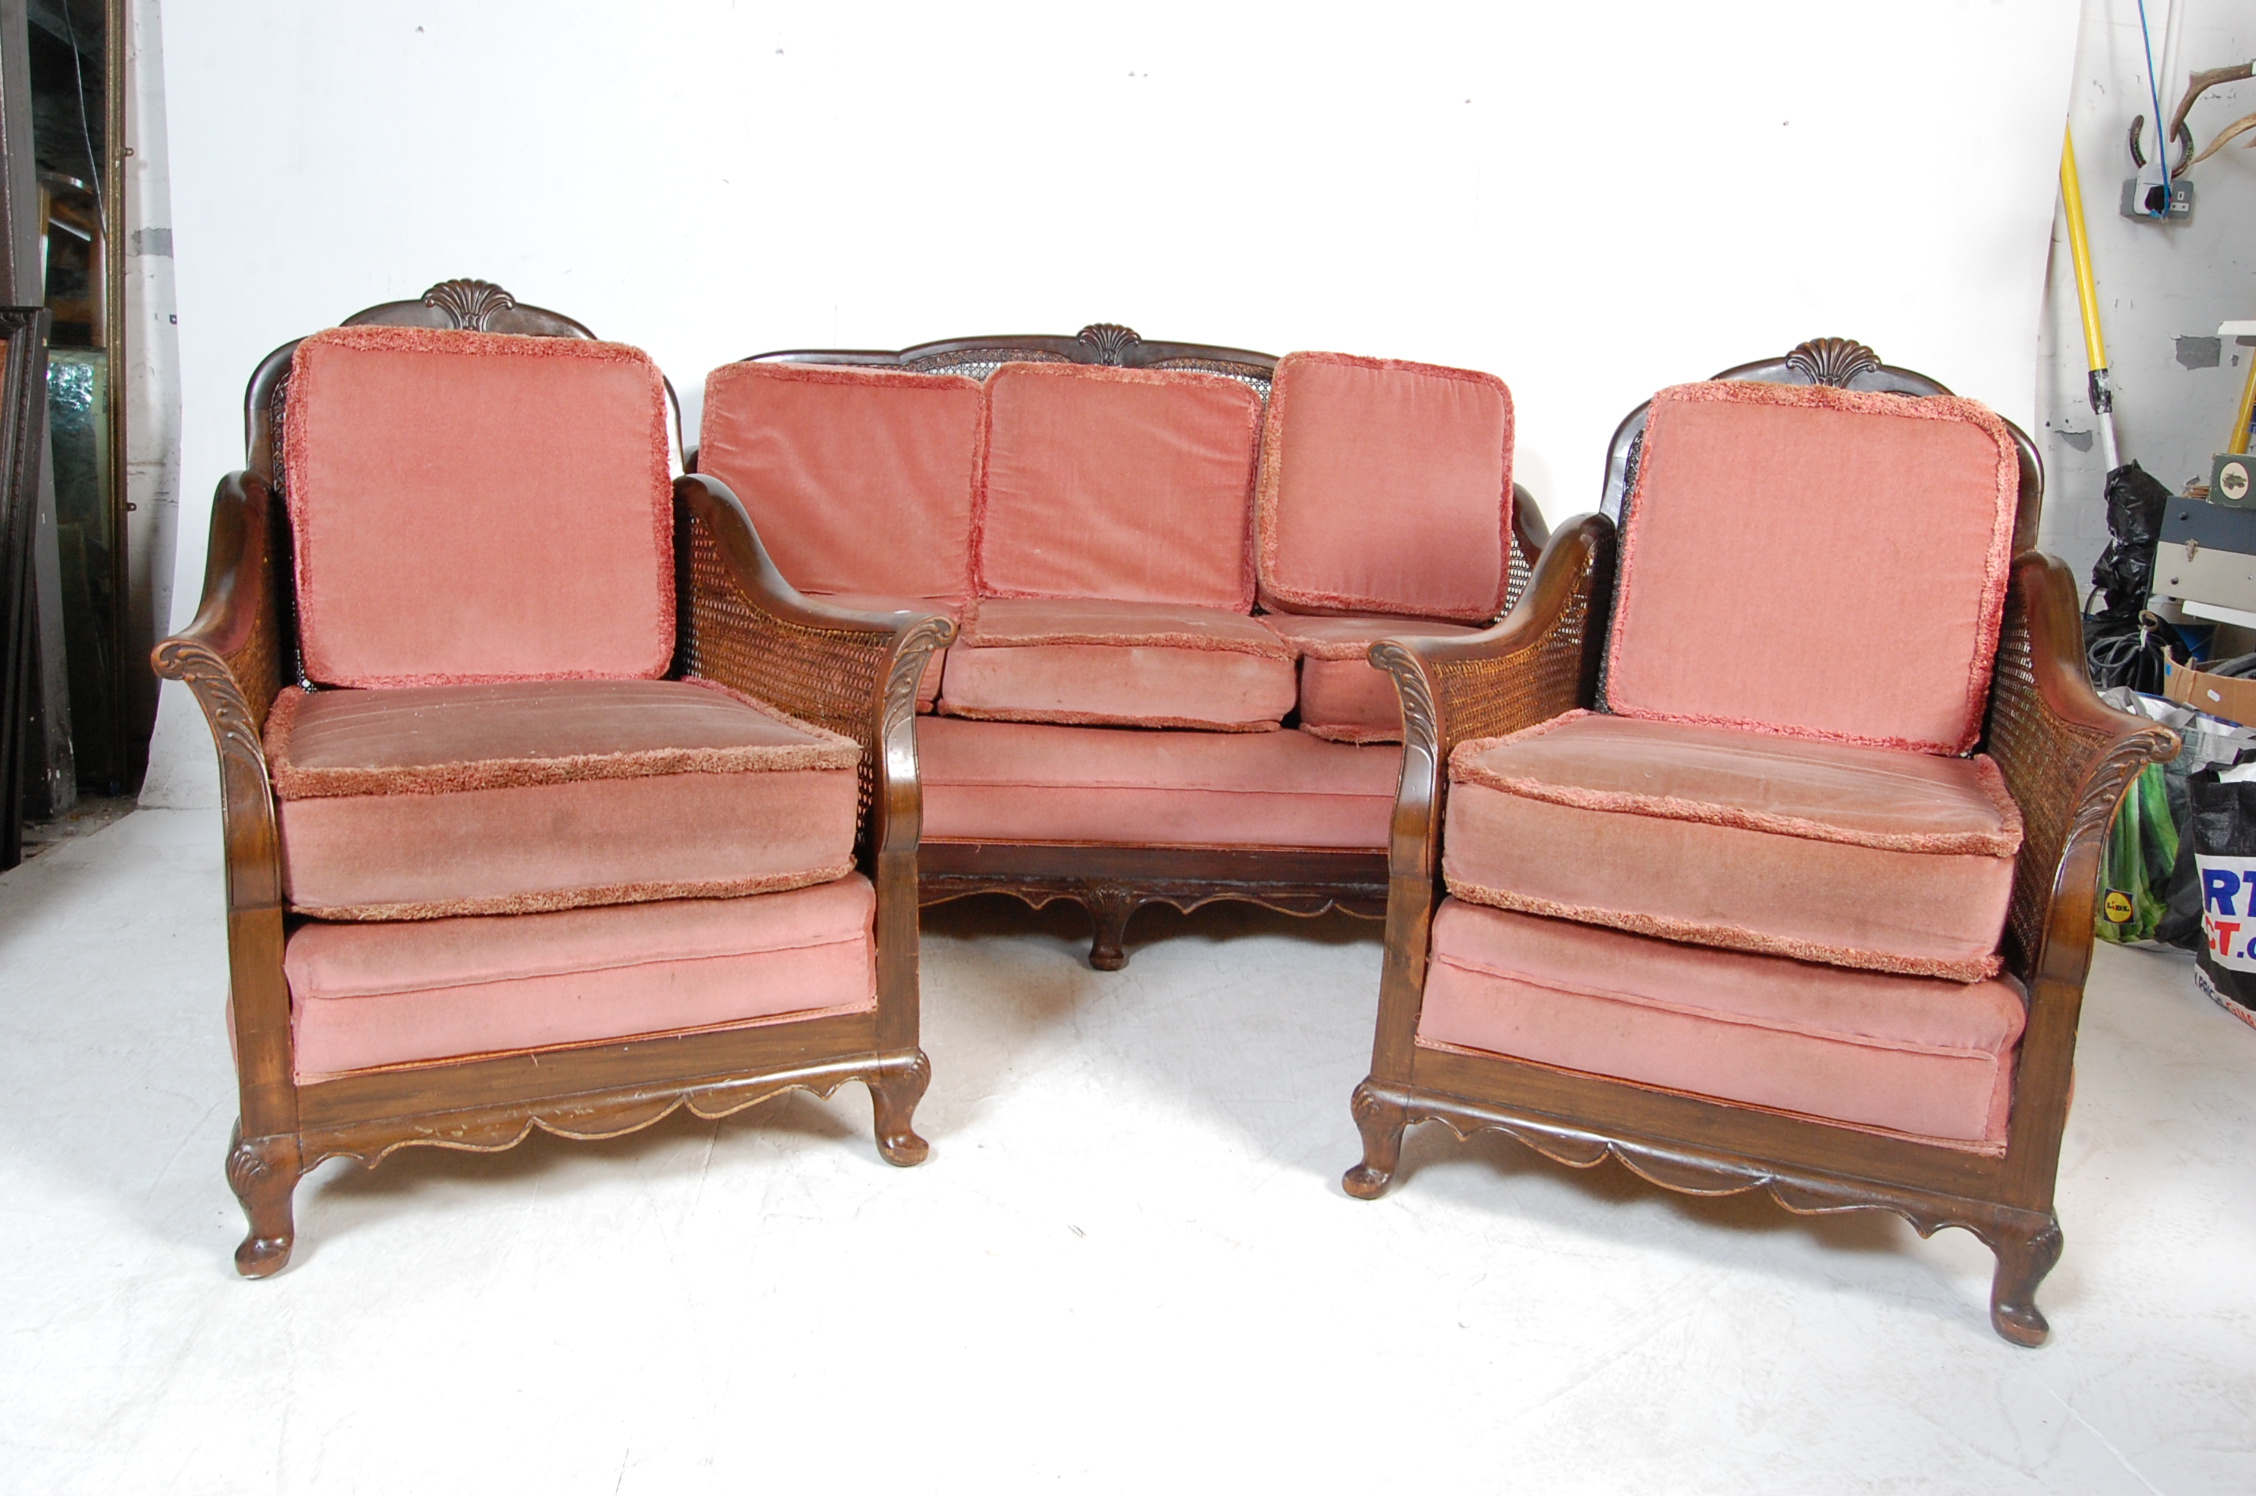 EDWARDIAN MAHOGANY CANED BERGERE 3 PIECE SUITE